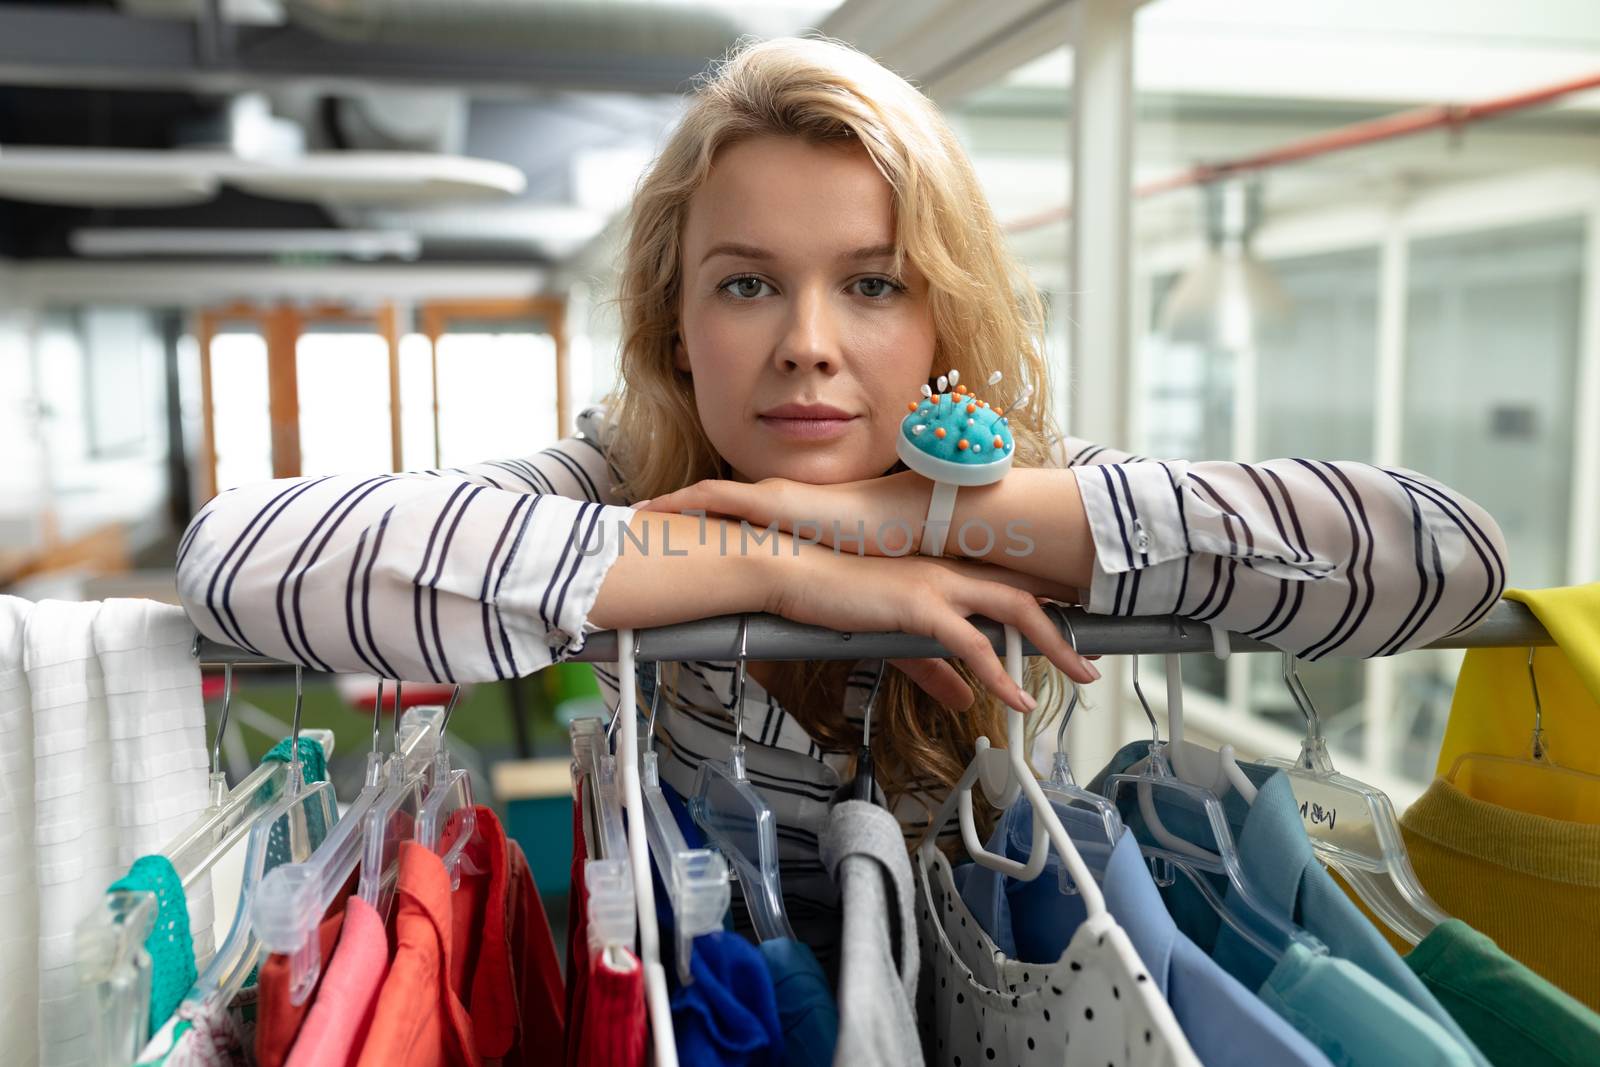 Portrait of Caucasian female fashion designer leaning on clothes rack in design studio. This is a casual creative start-up business office for a diverse team